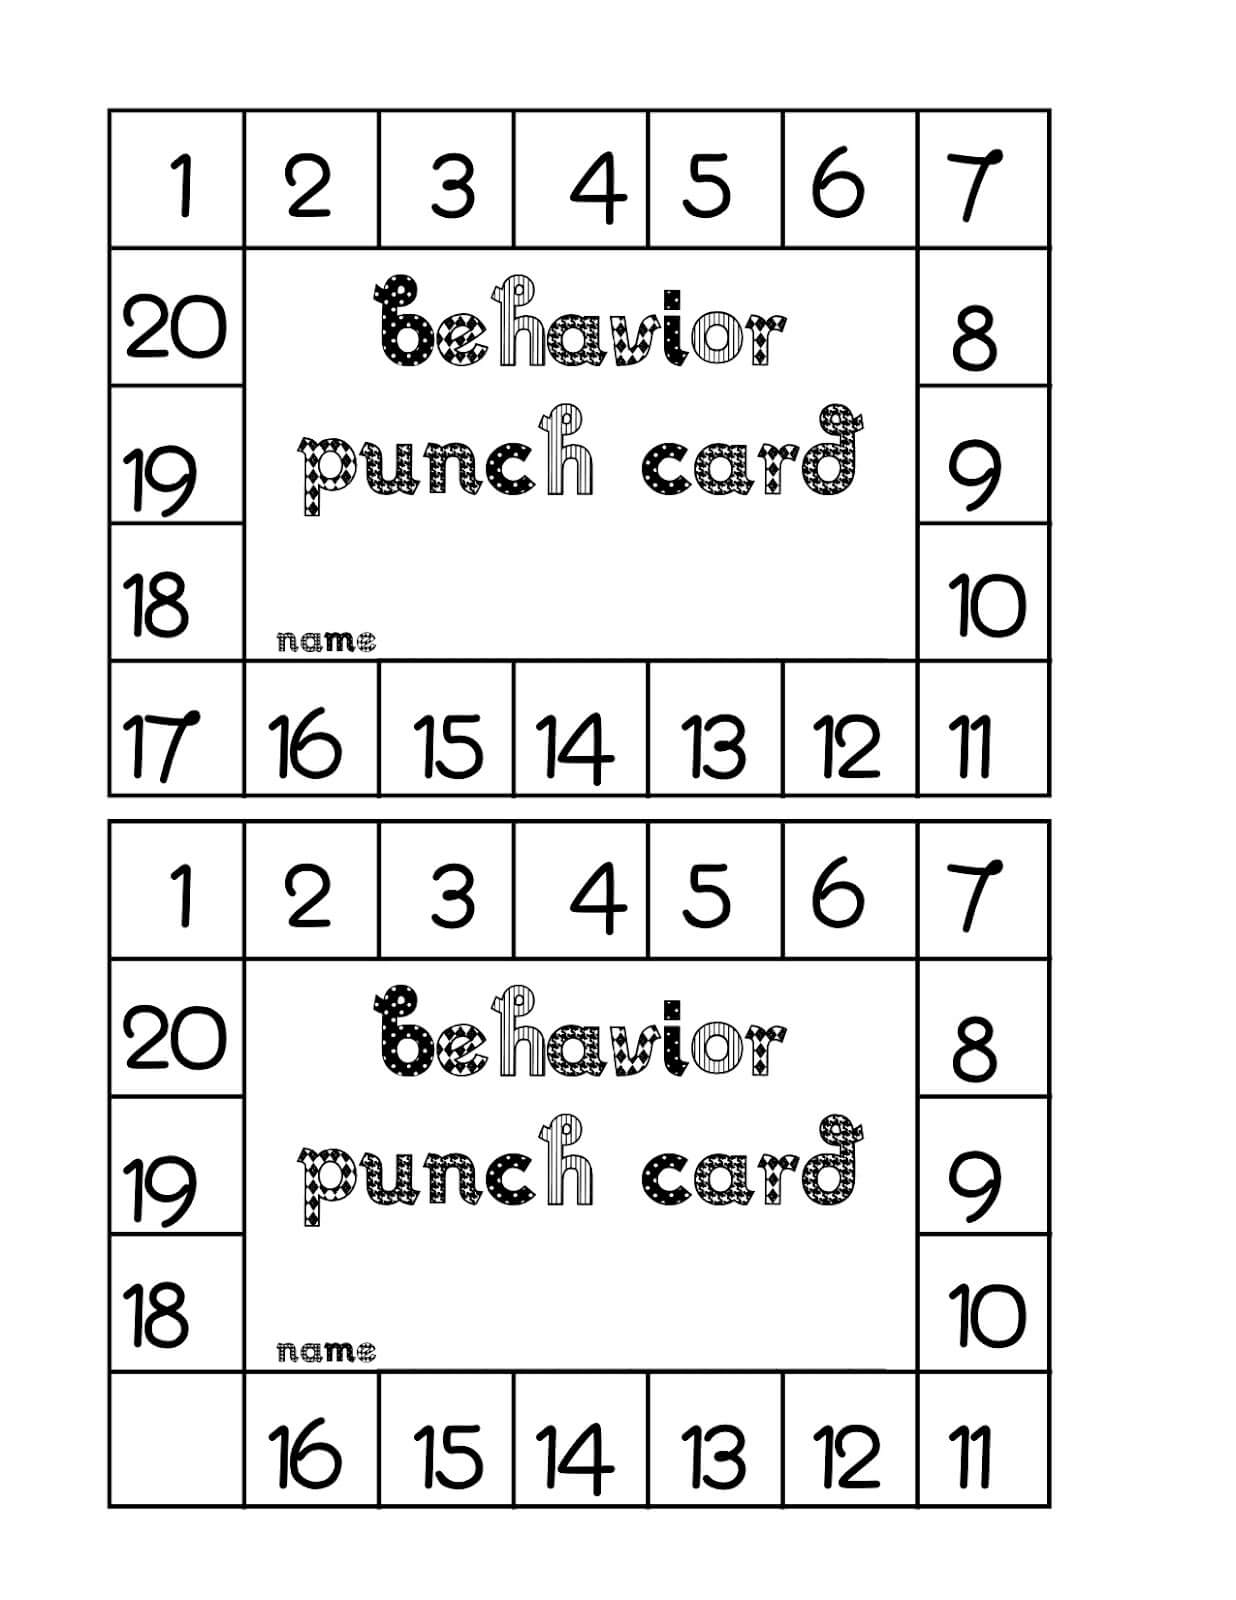 Punch Card Template Free ] – Free Printable Punch Card Throughout Reward Punch Card Template